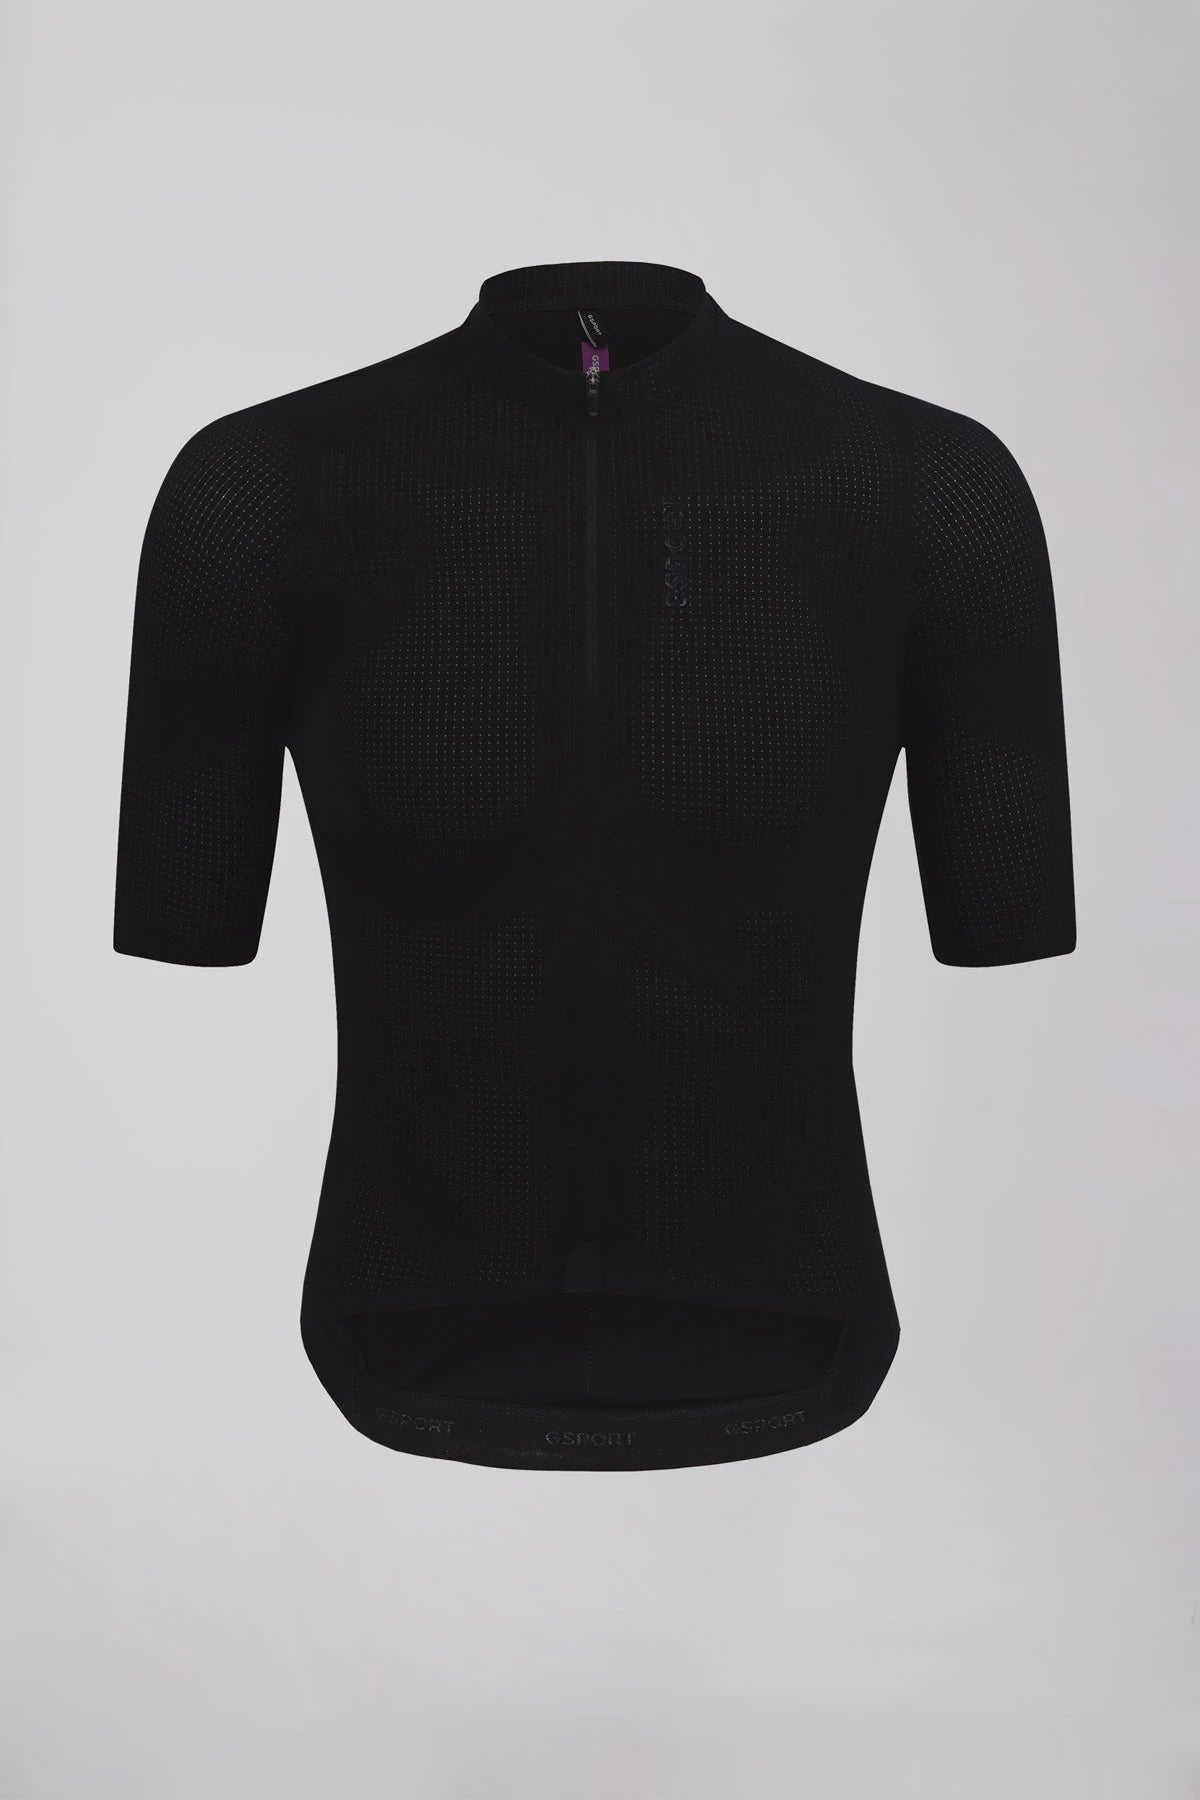 Gsport Maillot Pro Skin Carbon